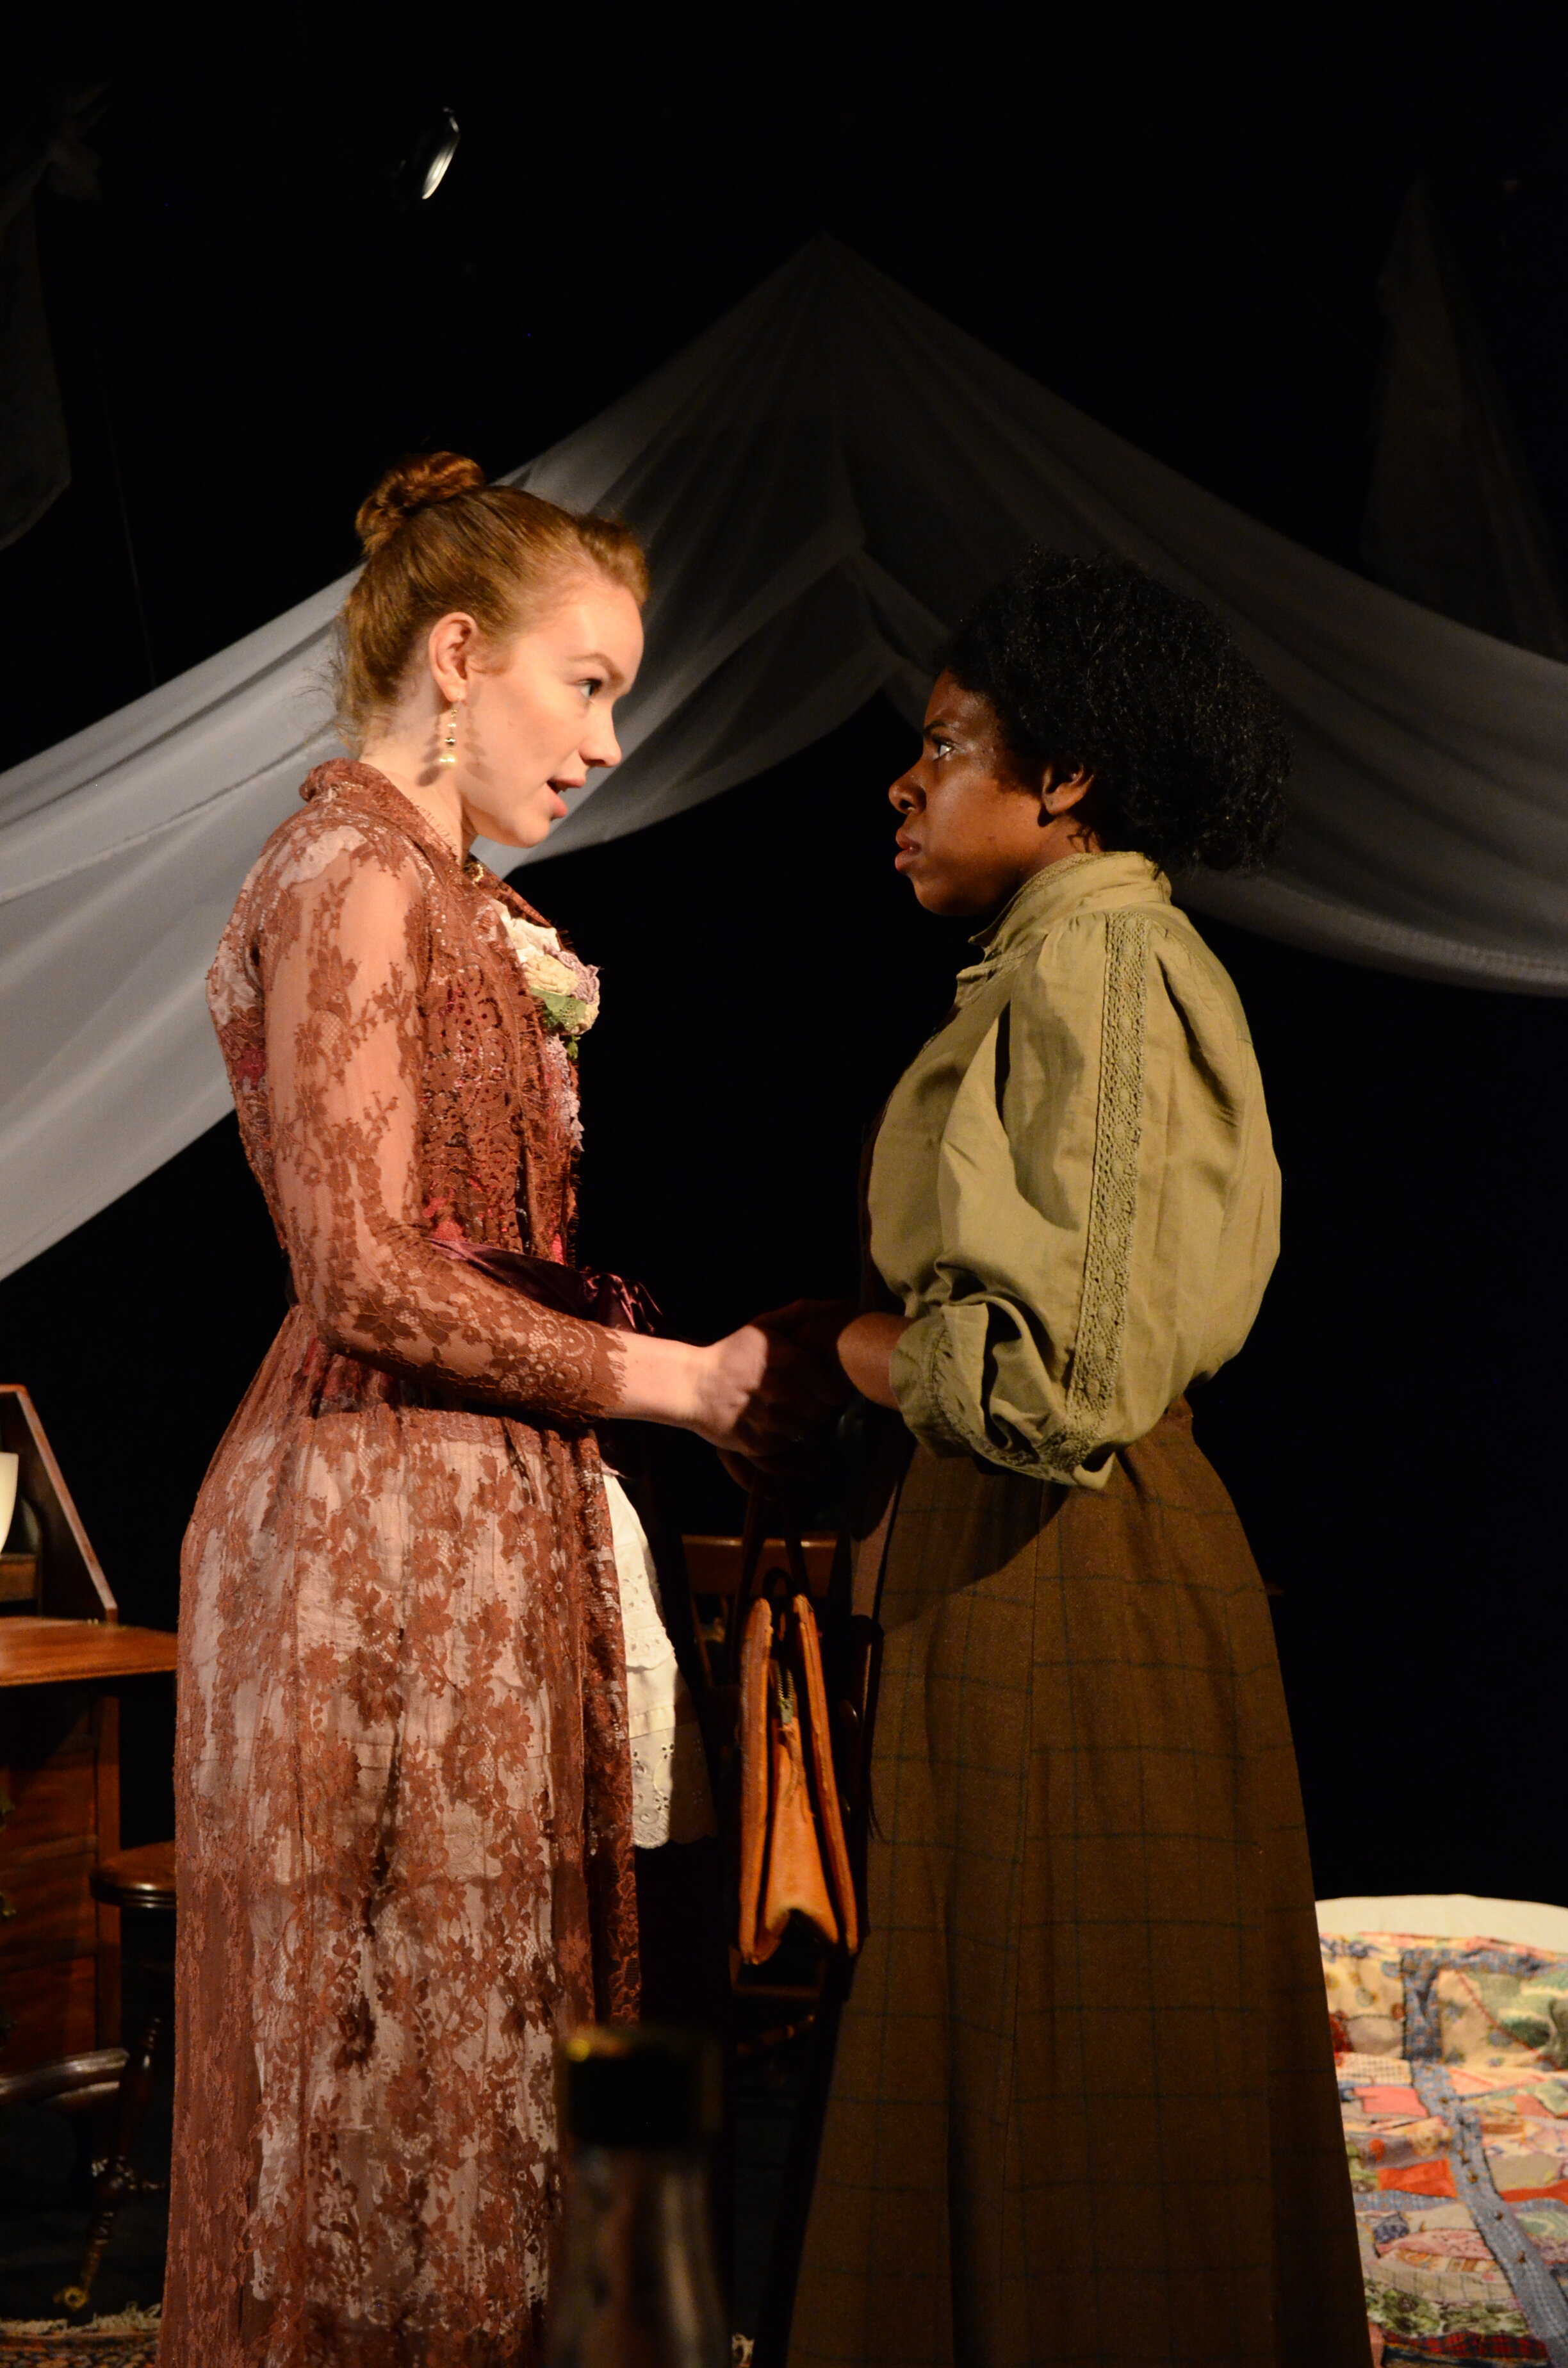  Mary Healy as Mrs. Van Buren and Dani Palmer as Esther Mills  in INTIMATE APPAREL, directed by Avital Shira.  Photo by Stephanie Lynn Yackovetsky. 